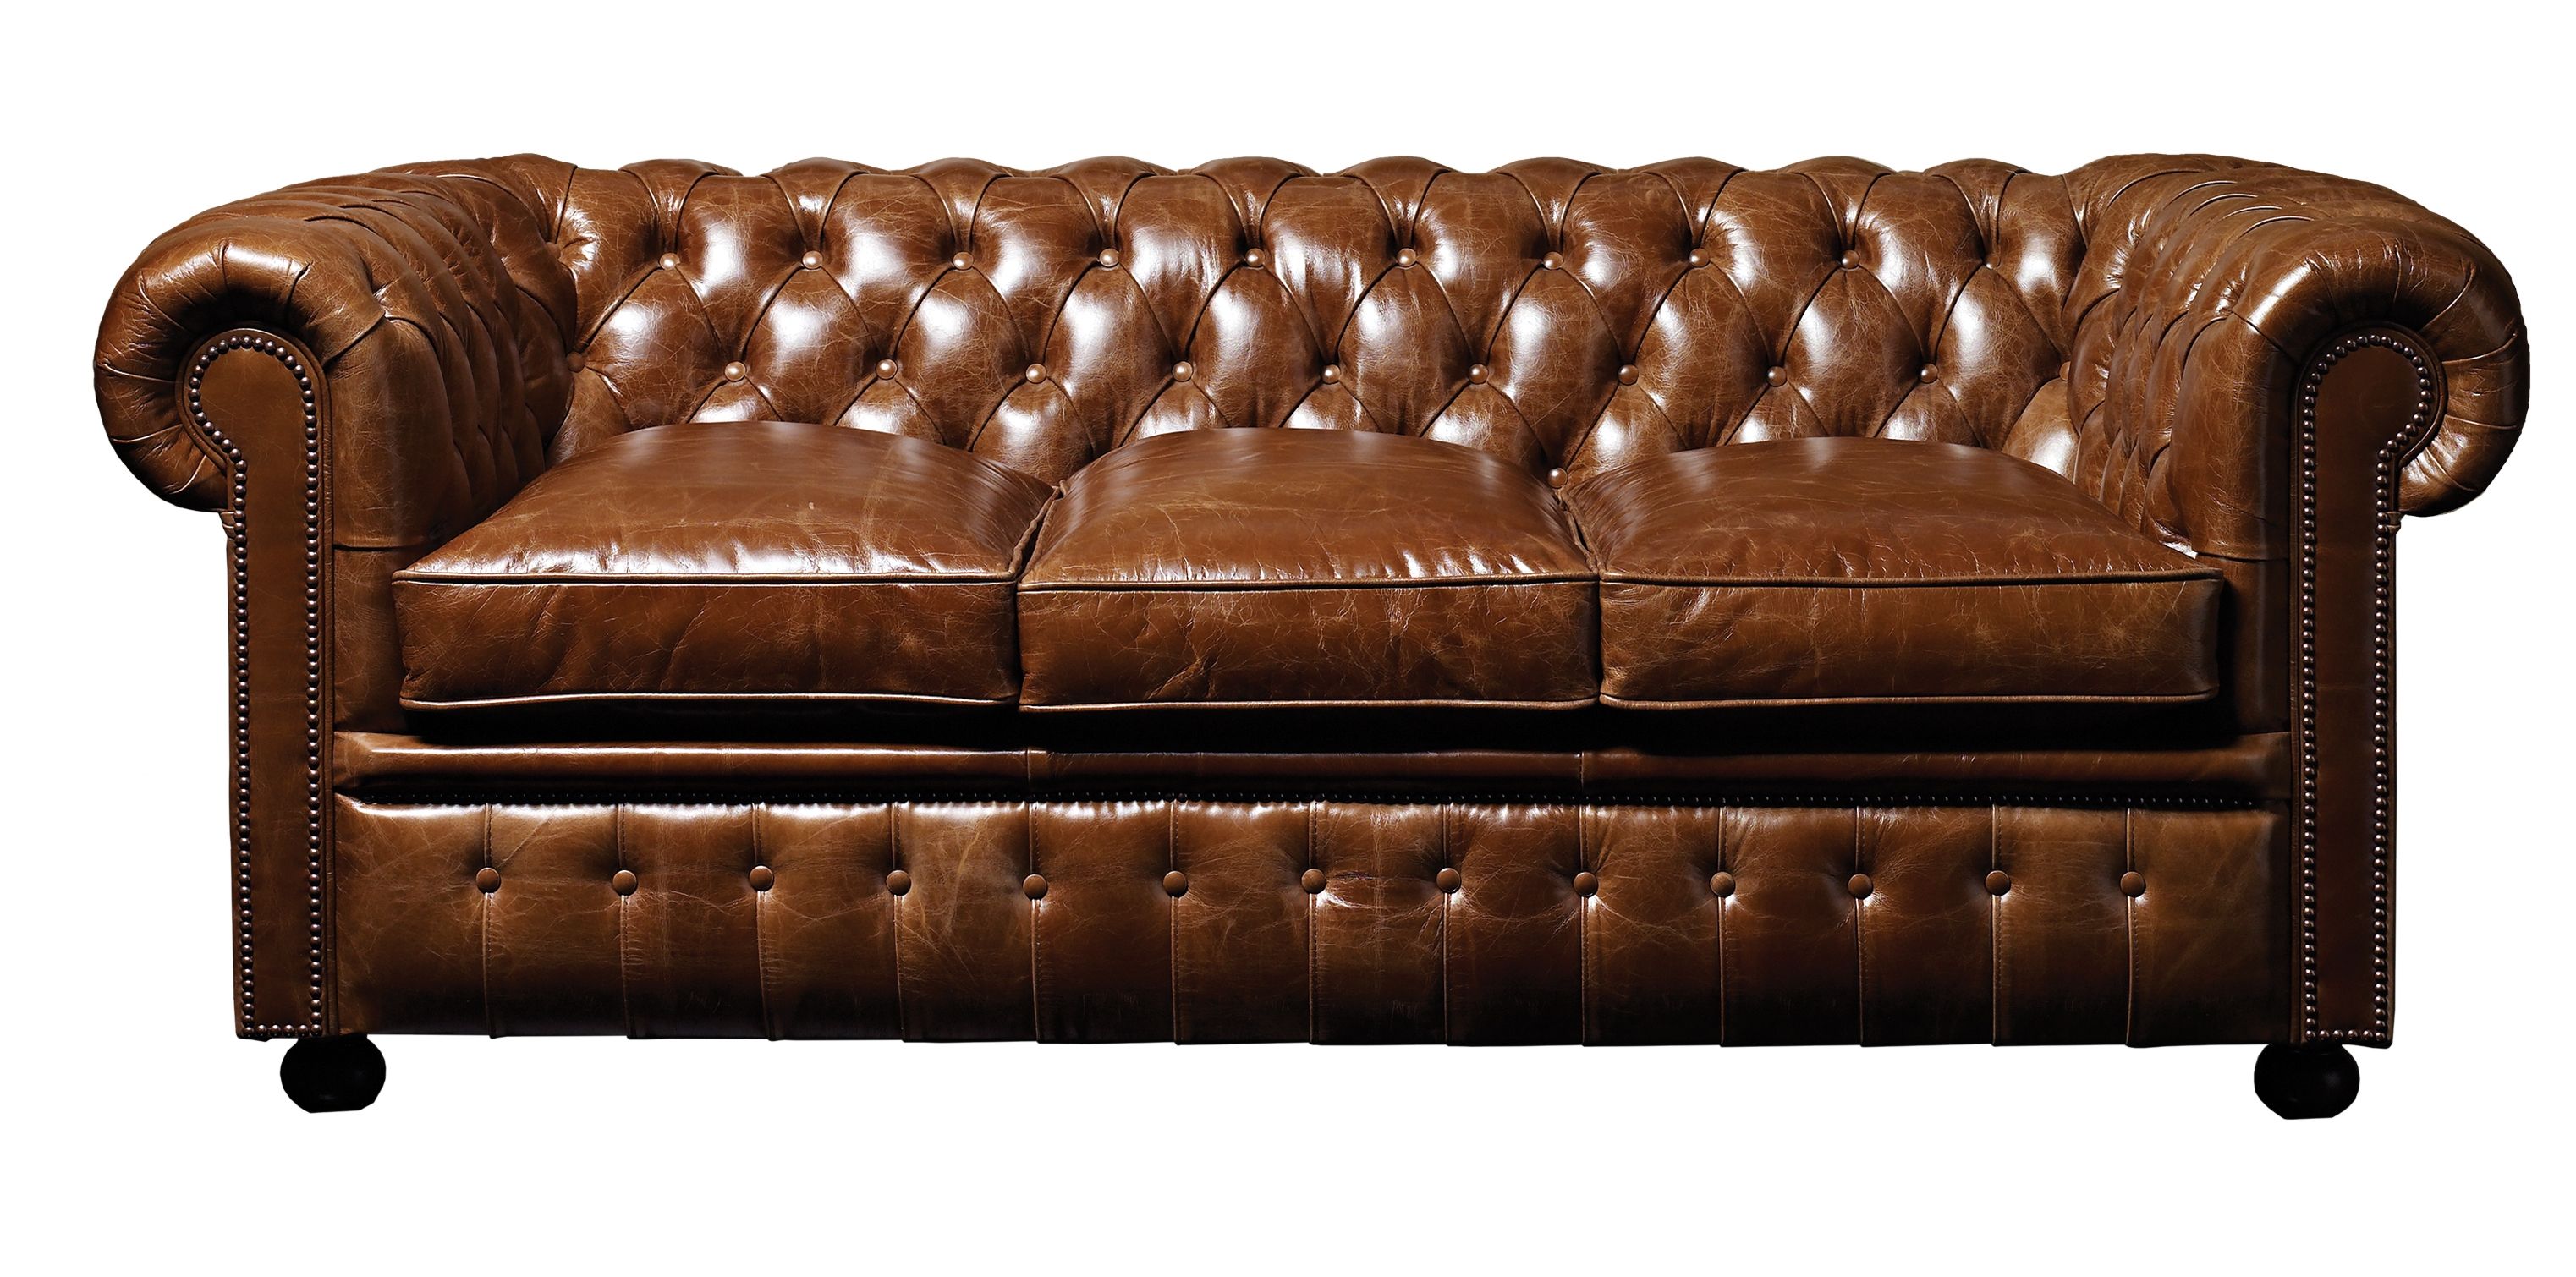 Leather Chesterfield Sofas Uk Awesome Leather Chesterfield Sofa Within Leather Chesterfield Sofas (View 10 of 15)